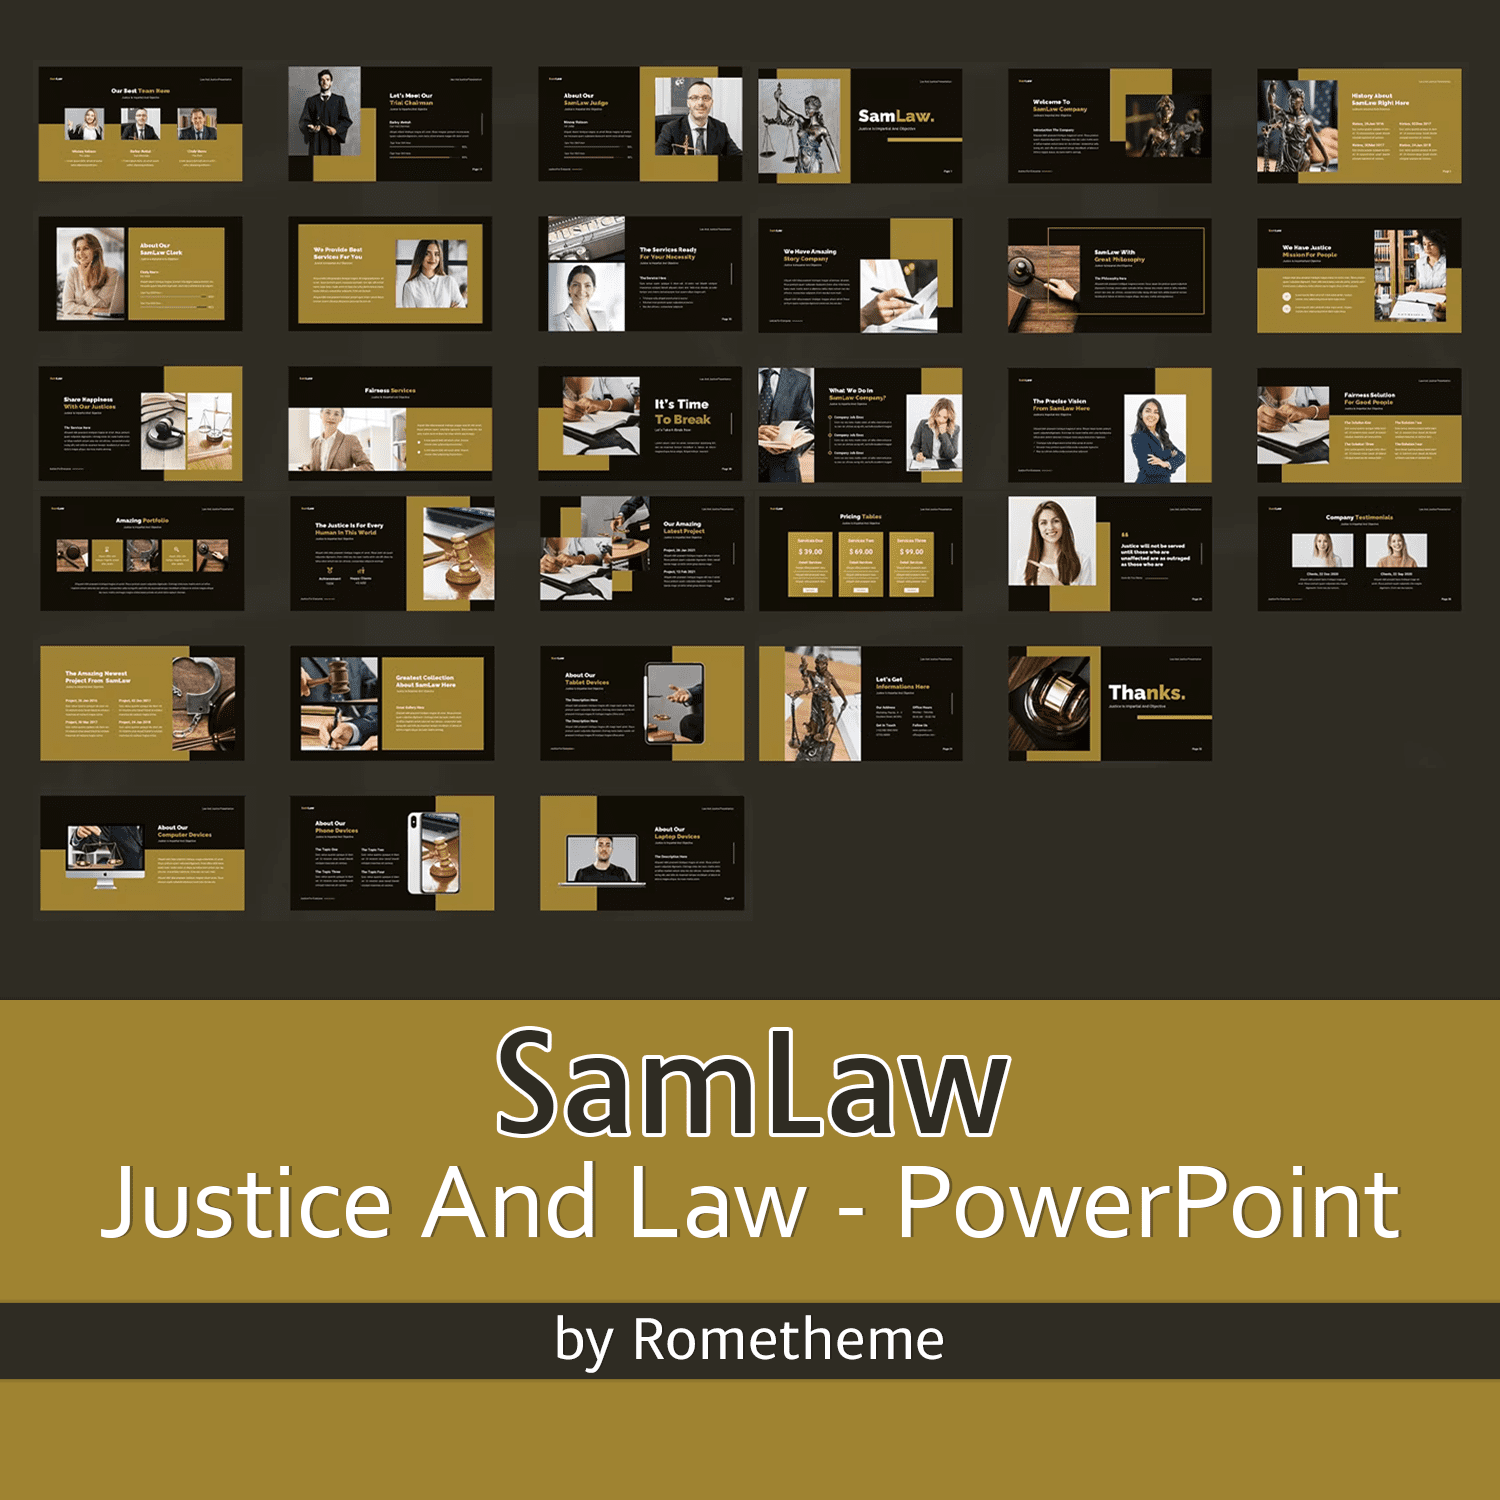 Preview samlaw justice and law powerpoint.